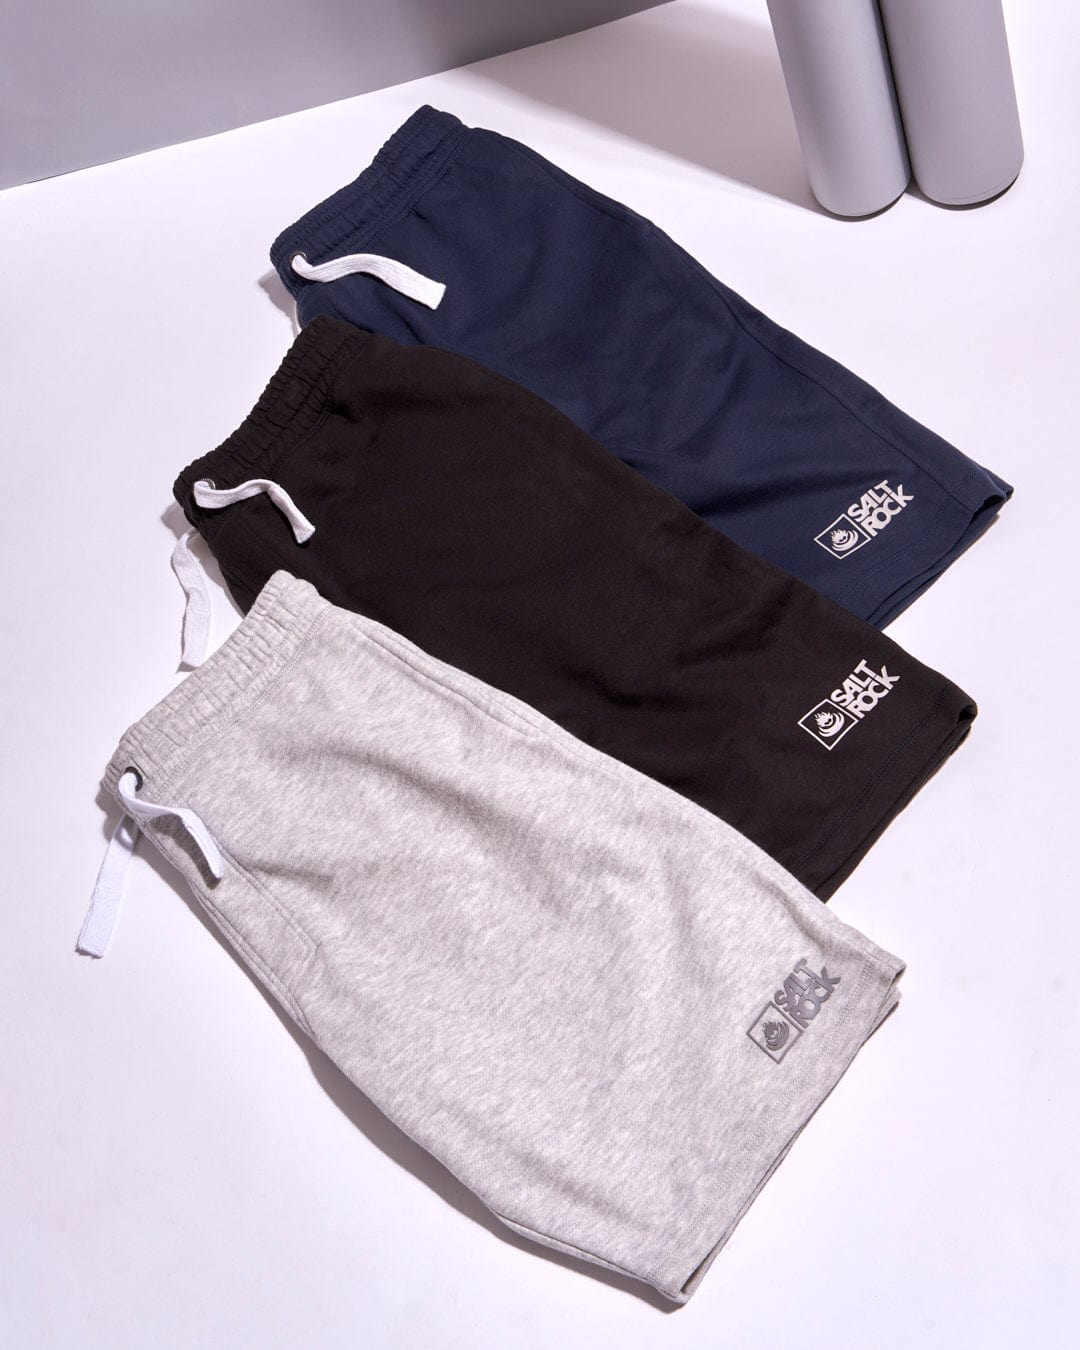 Three Saltrock Original men's shorts made of jersey material on a white surface.